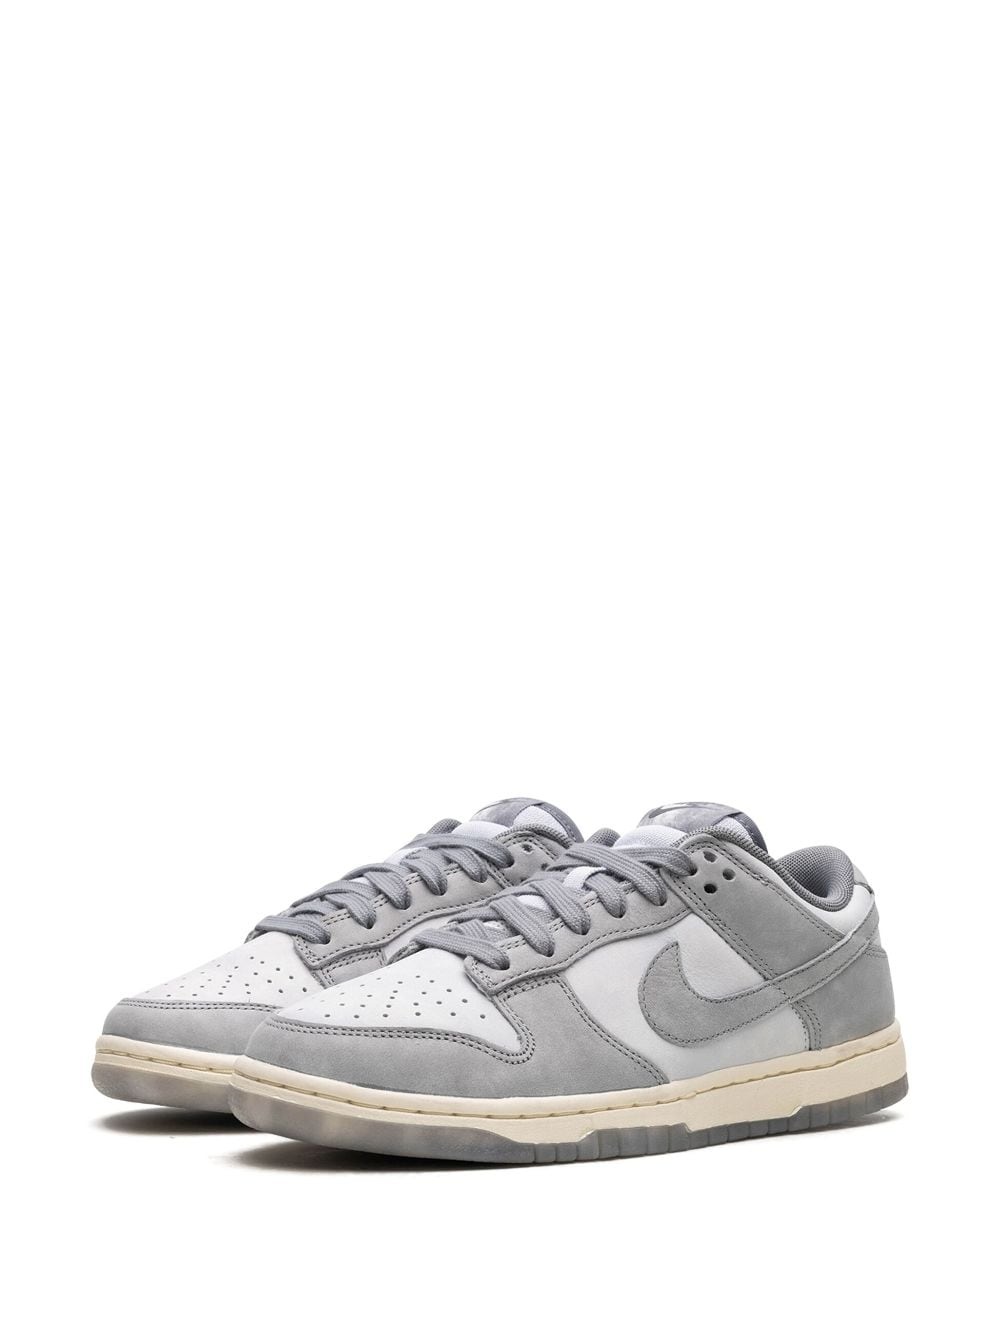 Dunk Low "Cool Grey" sneakers - 4